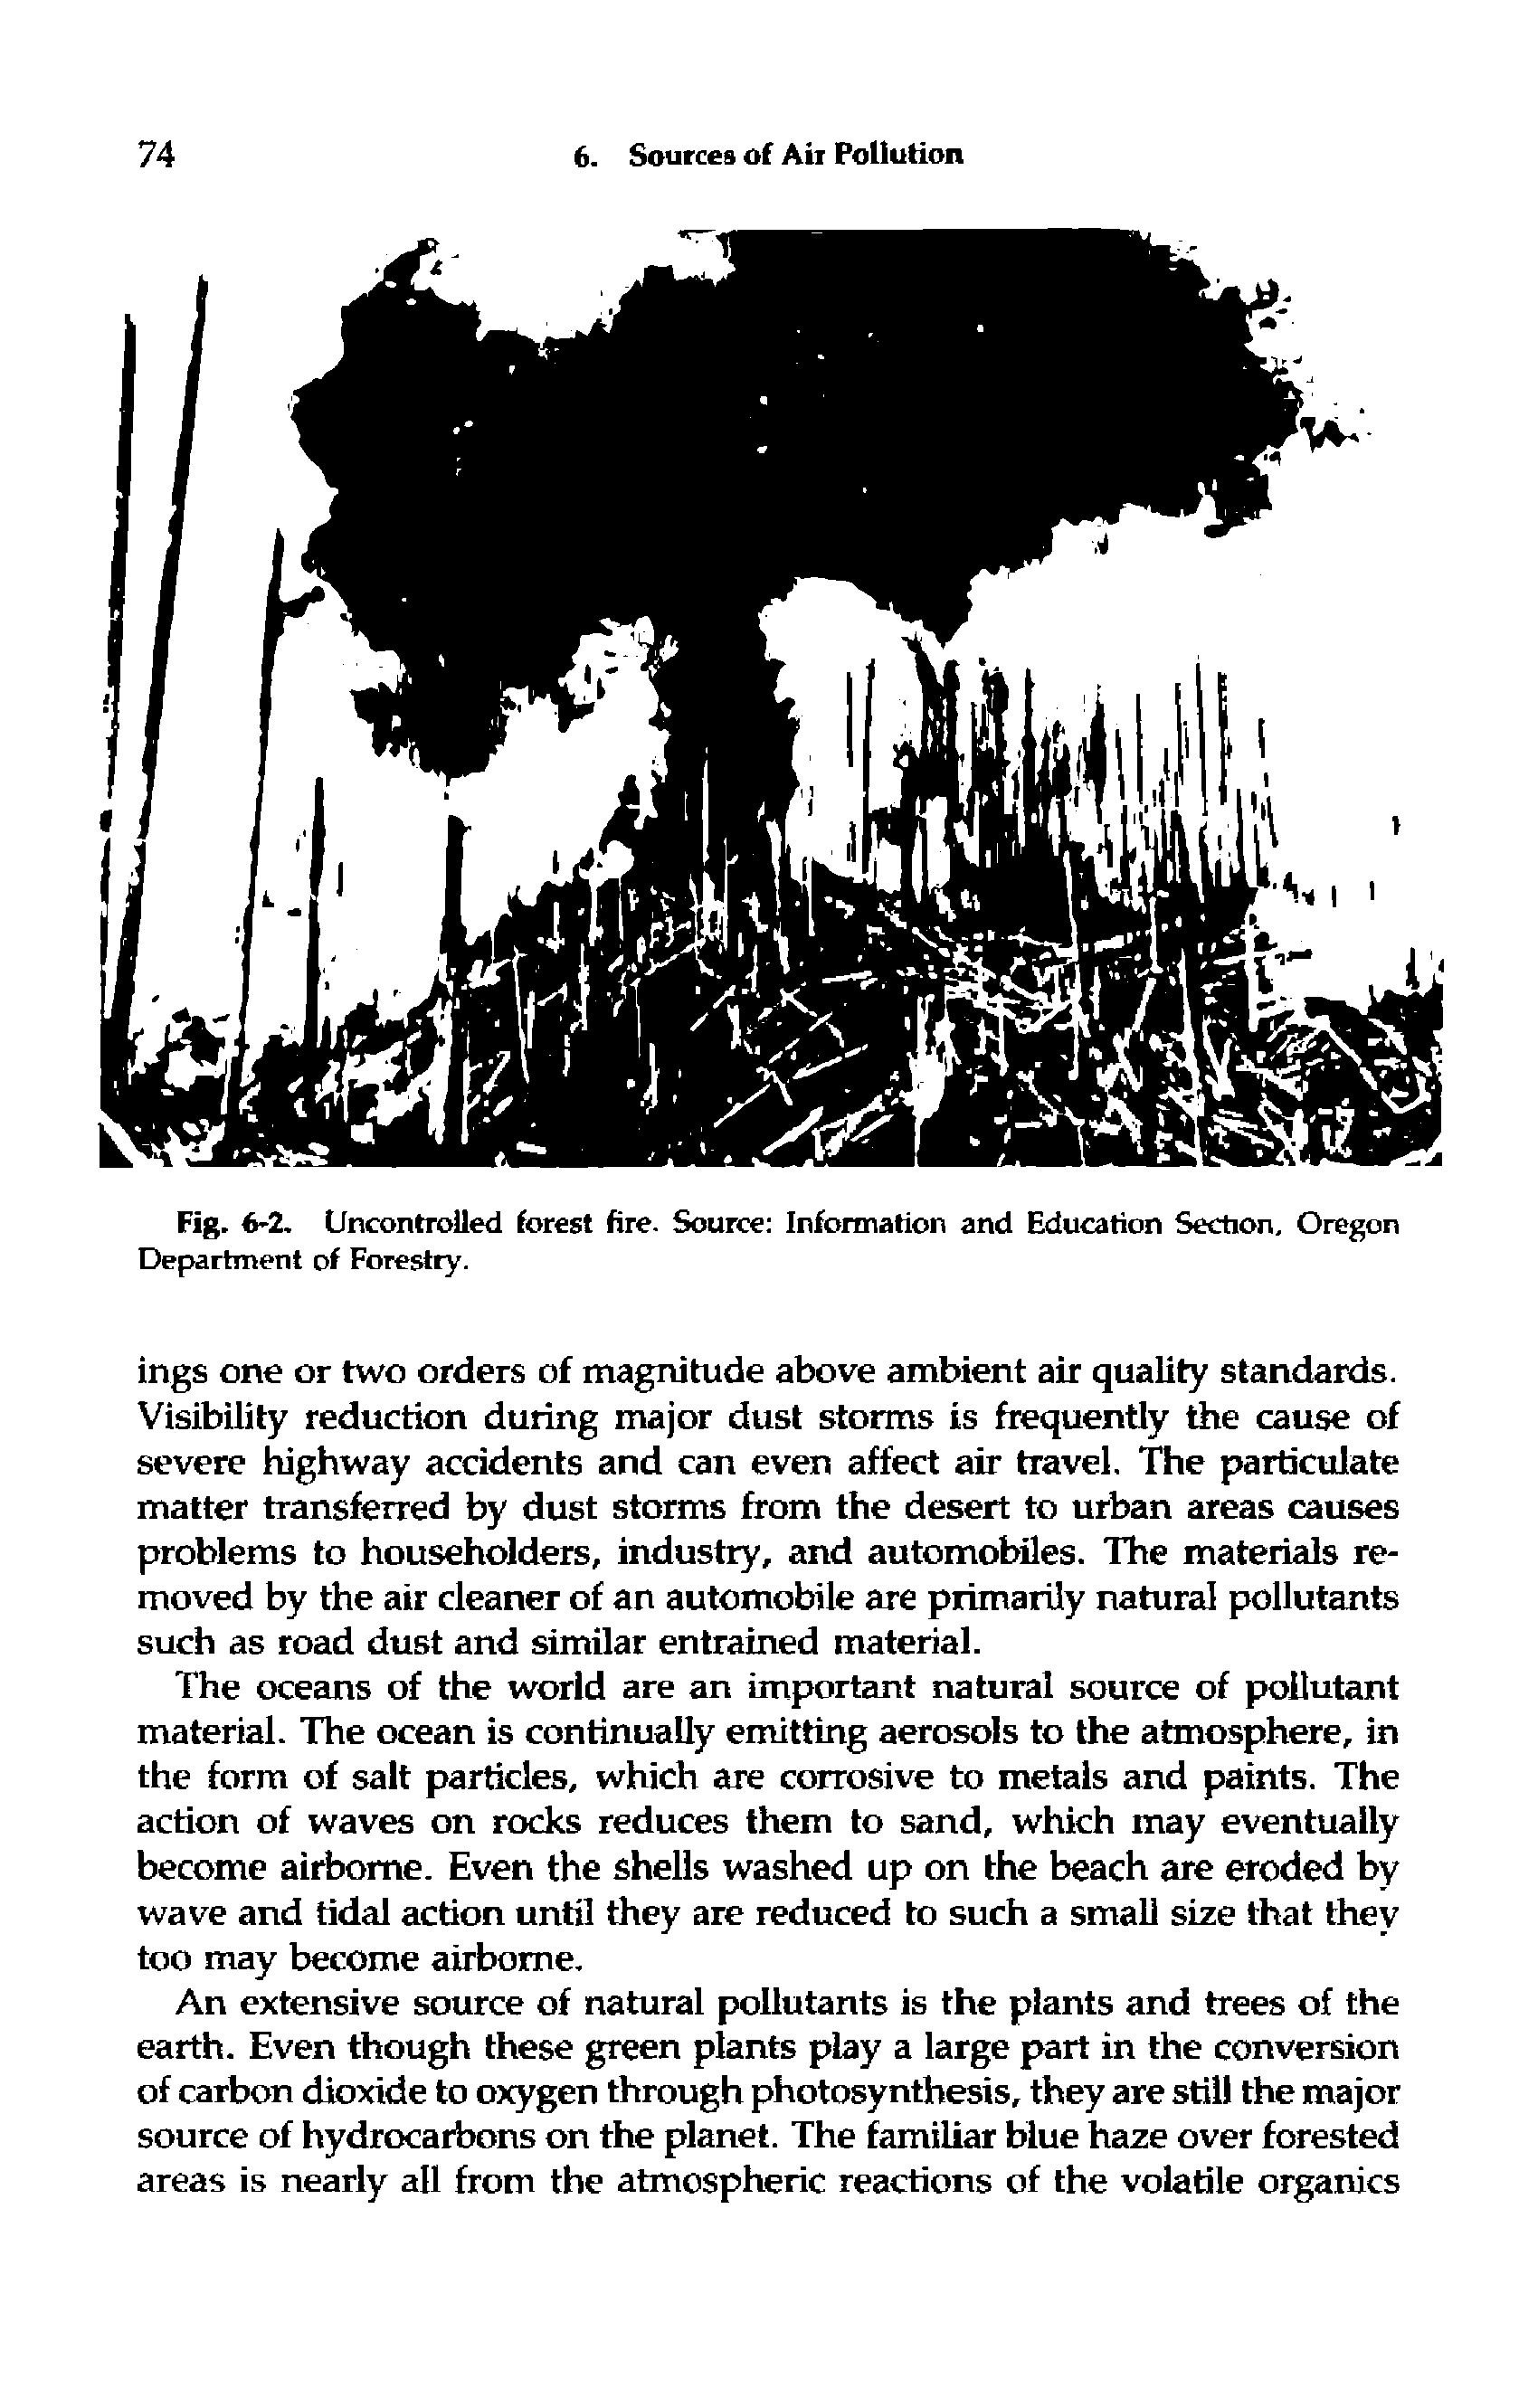 Fig. 6-2, Uncontroiled forest fire. Source Information and Education Section, Oregon Department of Forestry.